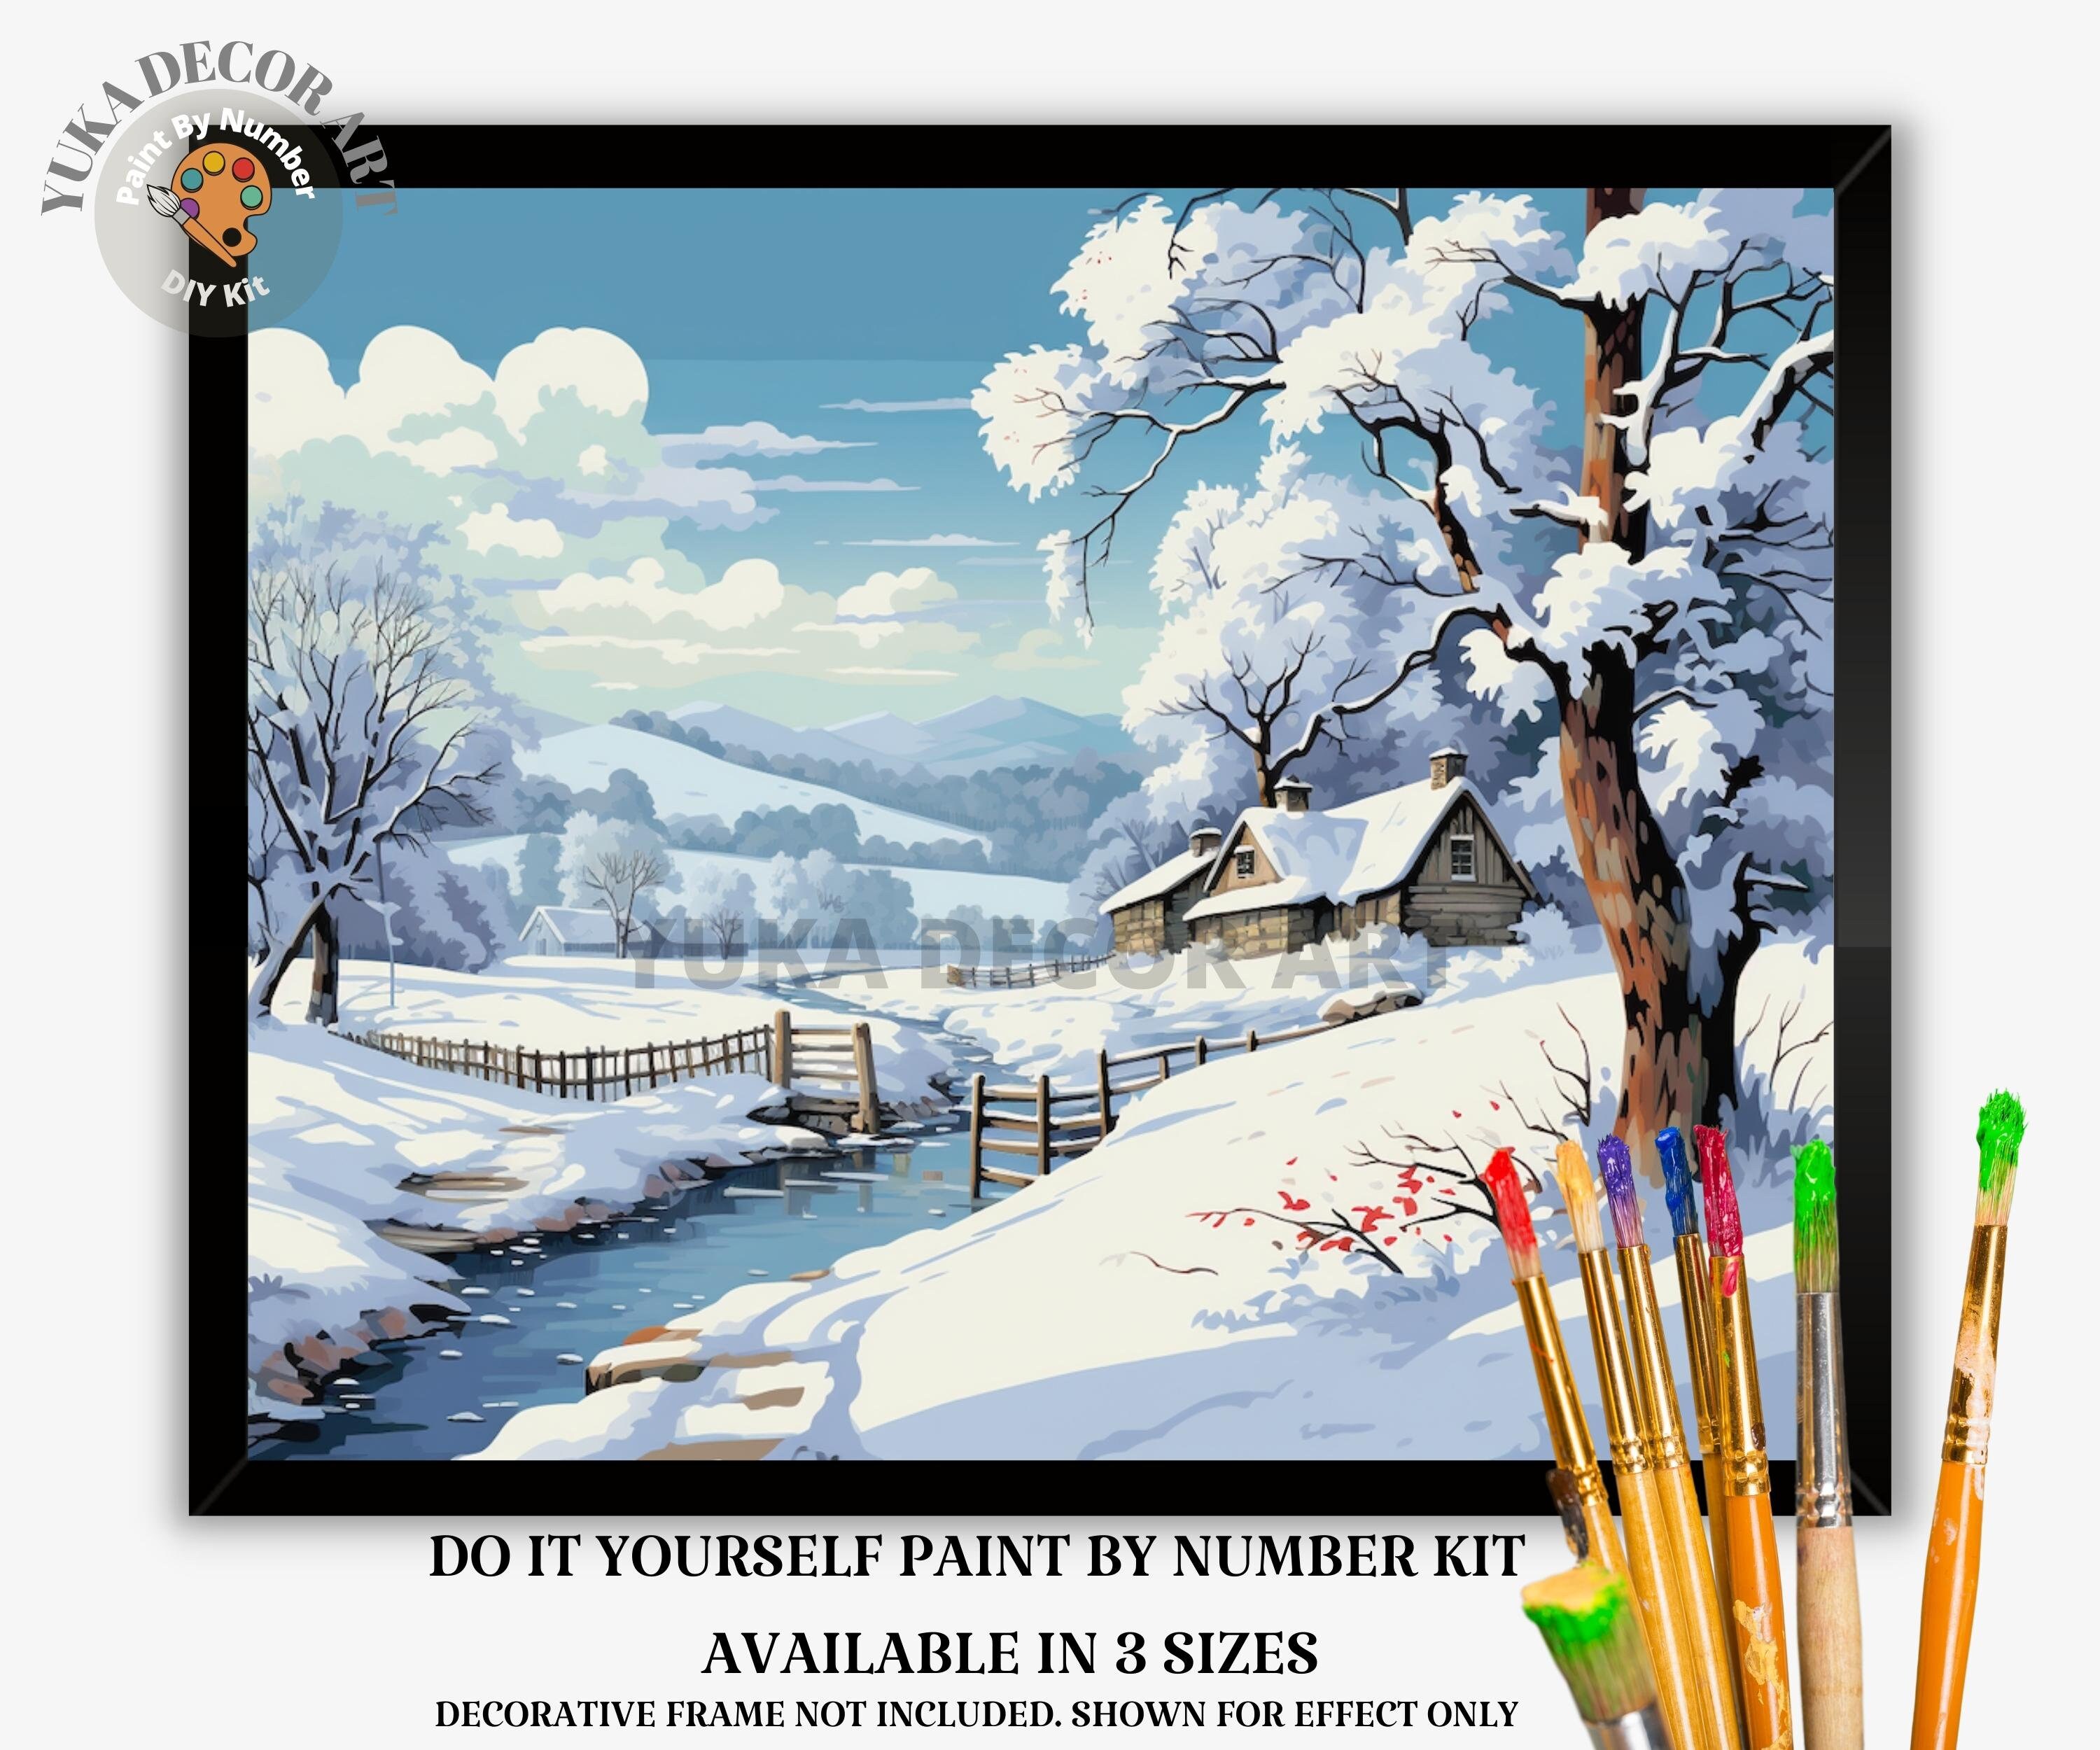 DIY Paint Party Kit Instant Download, Winter Church, Winter Scene, Includes  Tracer 8x10 and 11x14, Instructions and Supply List 